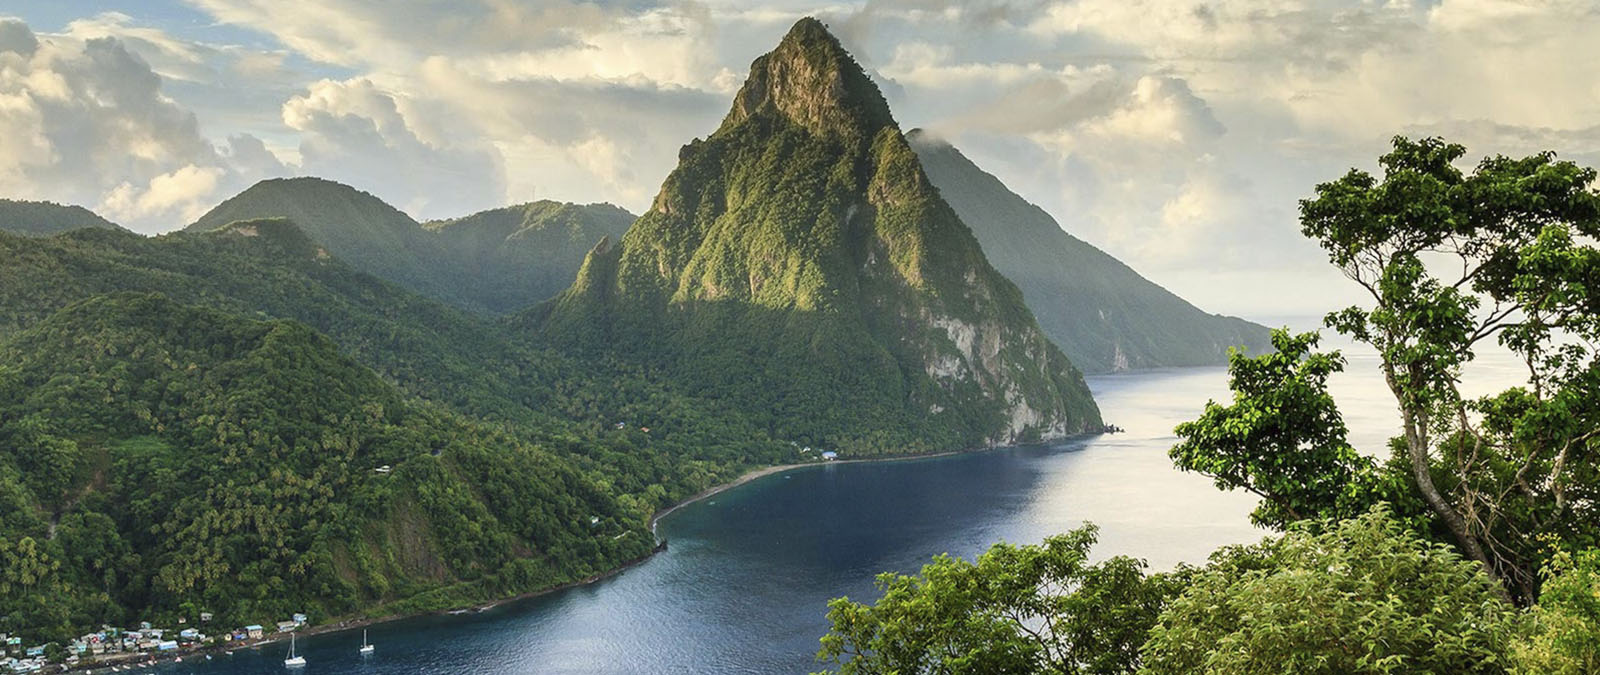 Saint Lucia is a member of the British Commonwealth and the United Nations.